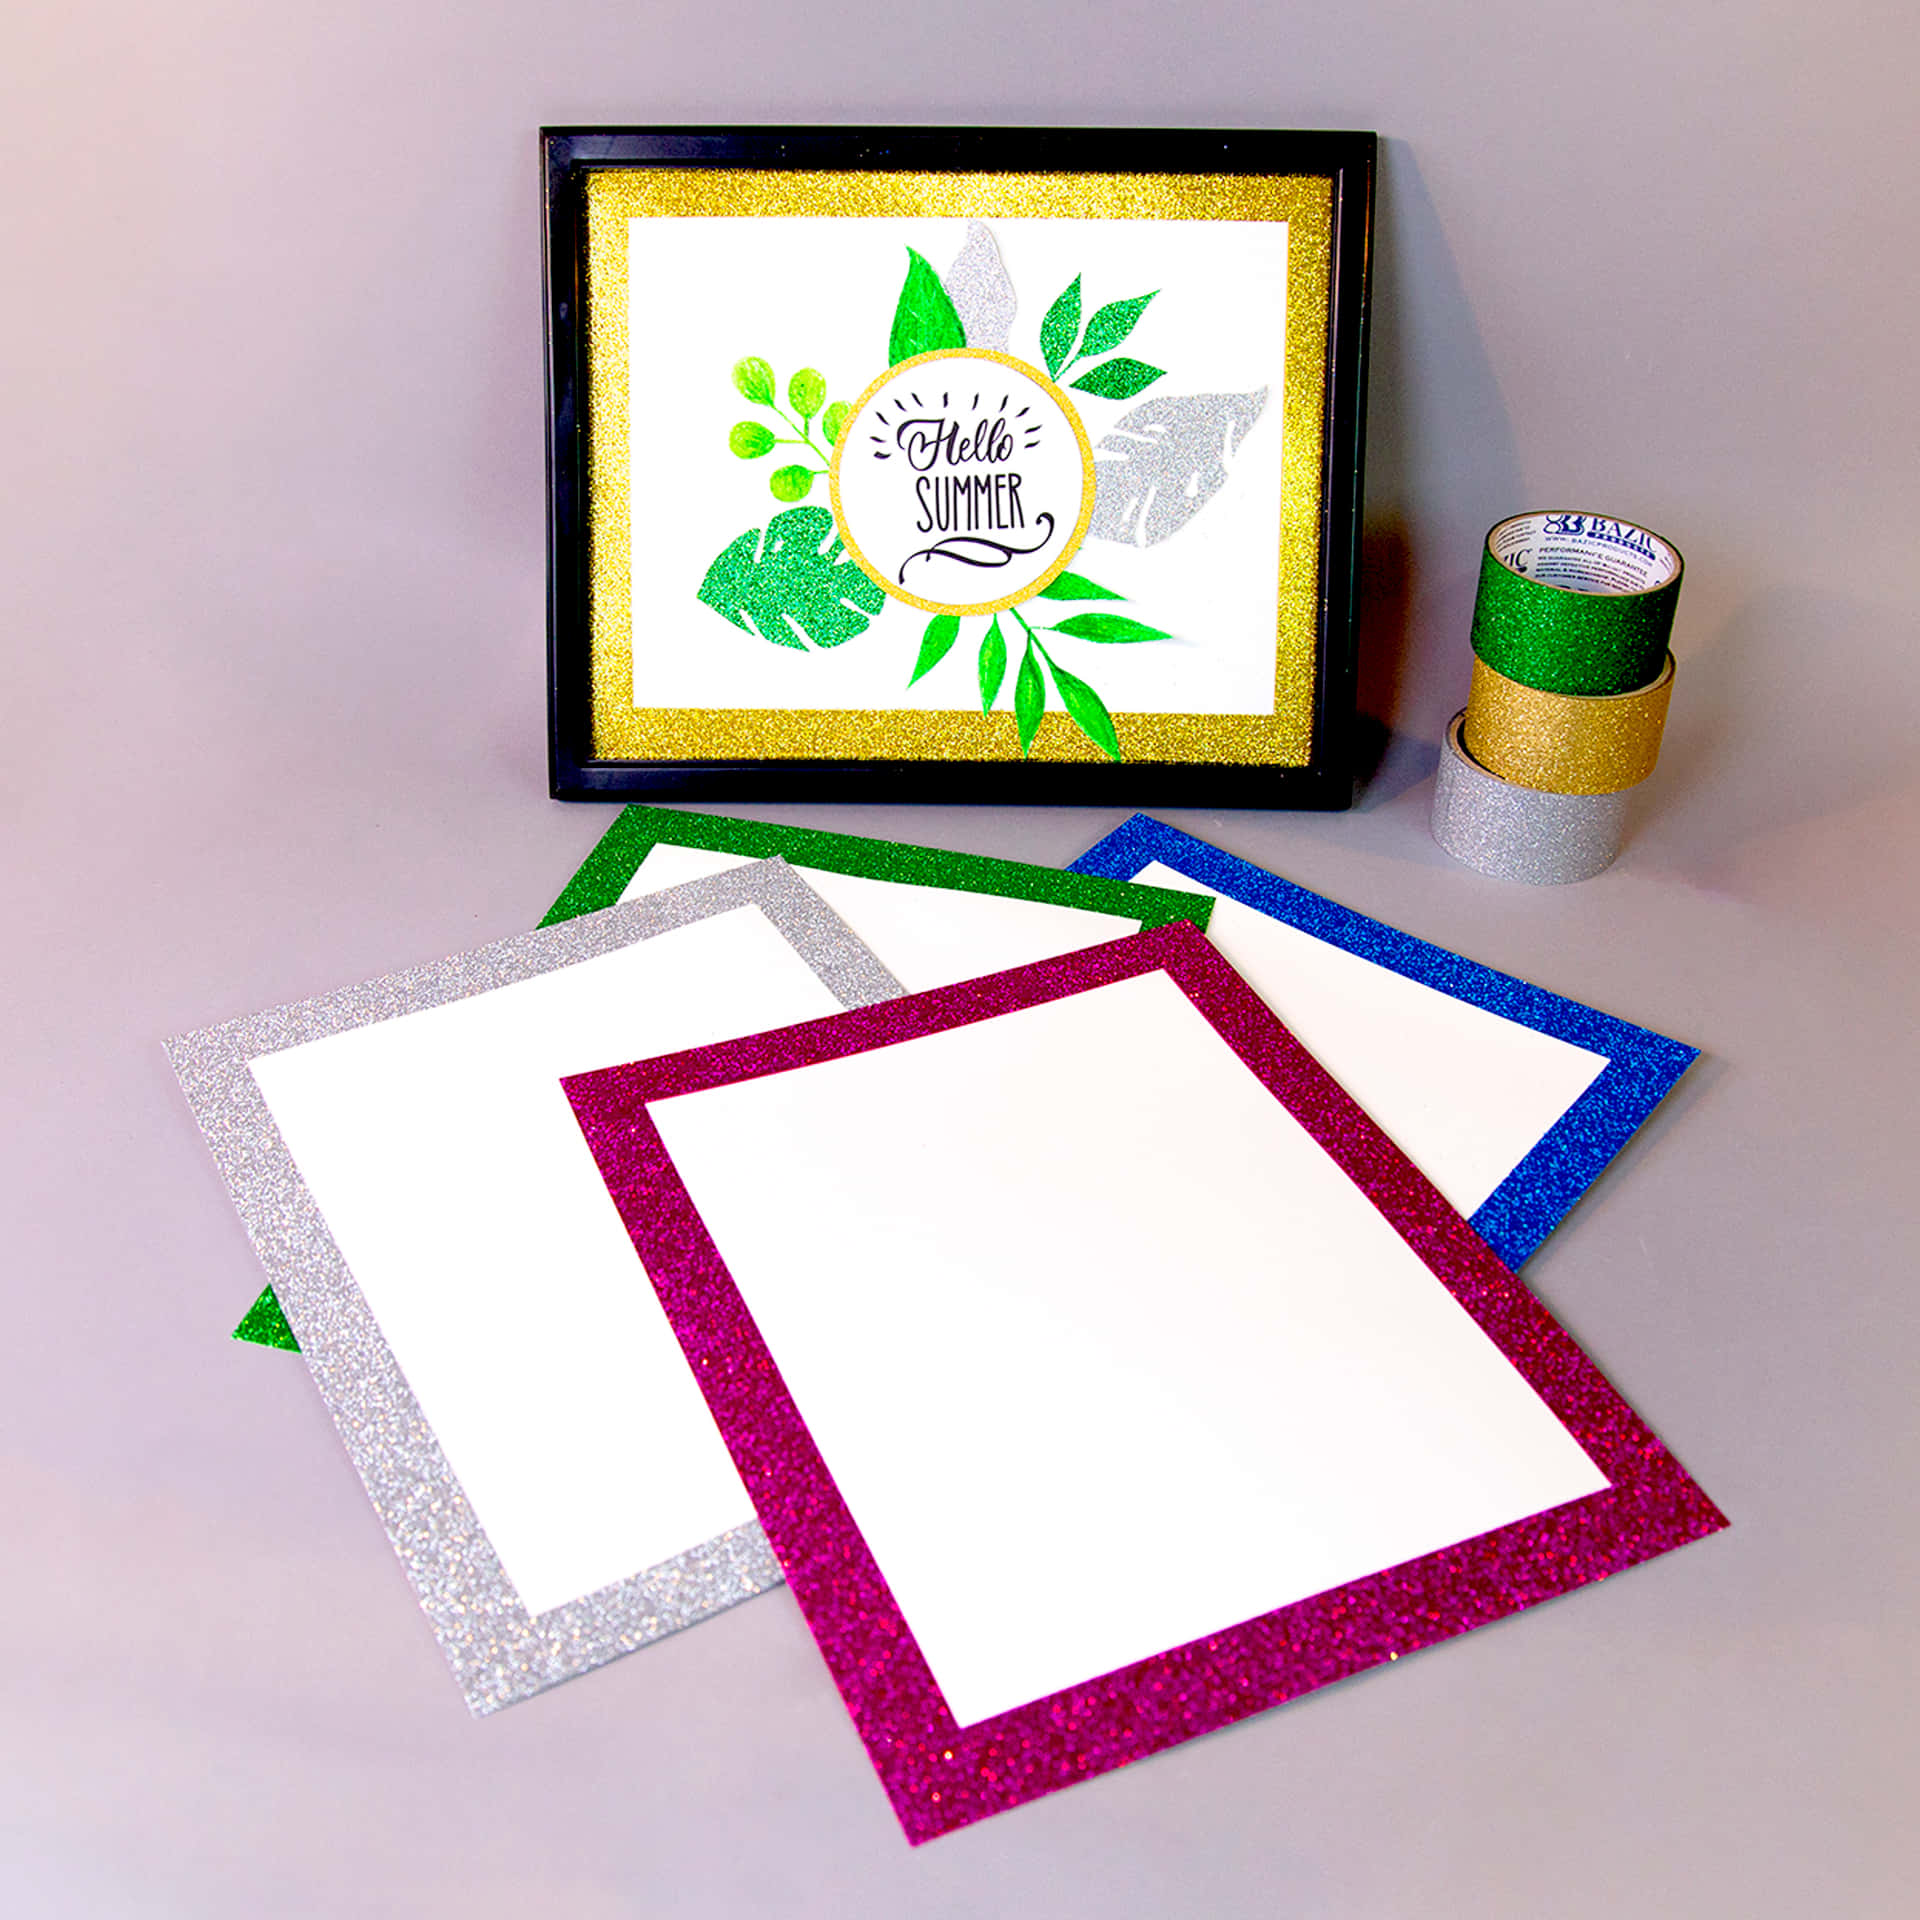 A Frame With A Green, Blue, And Yellow Frame